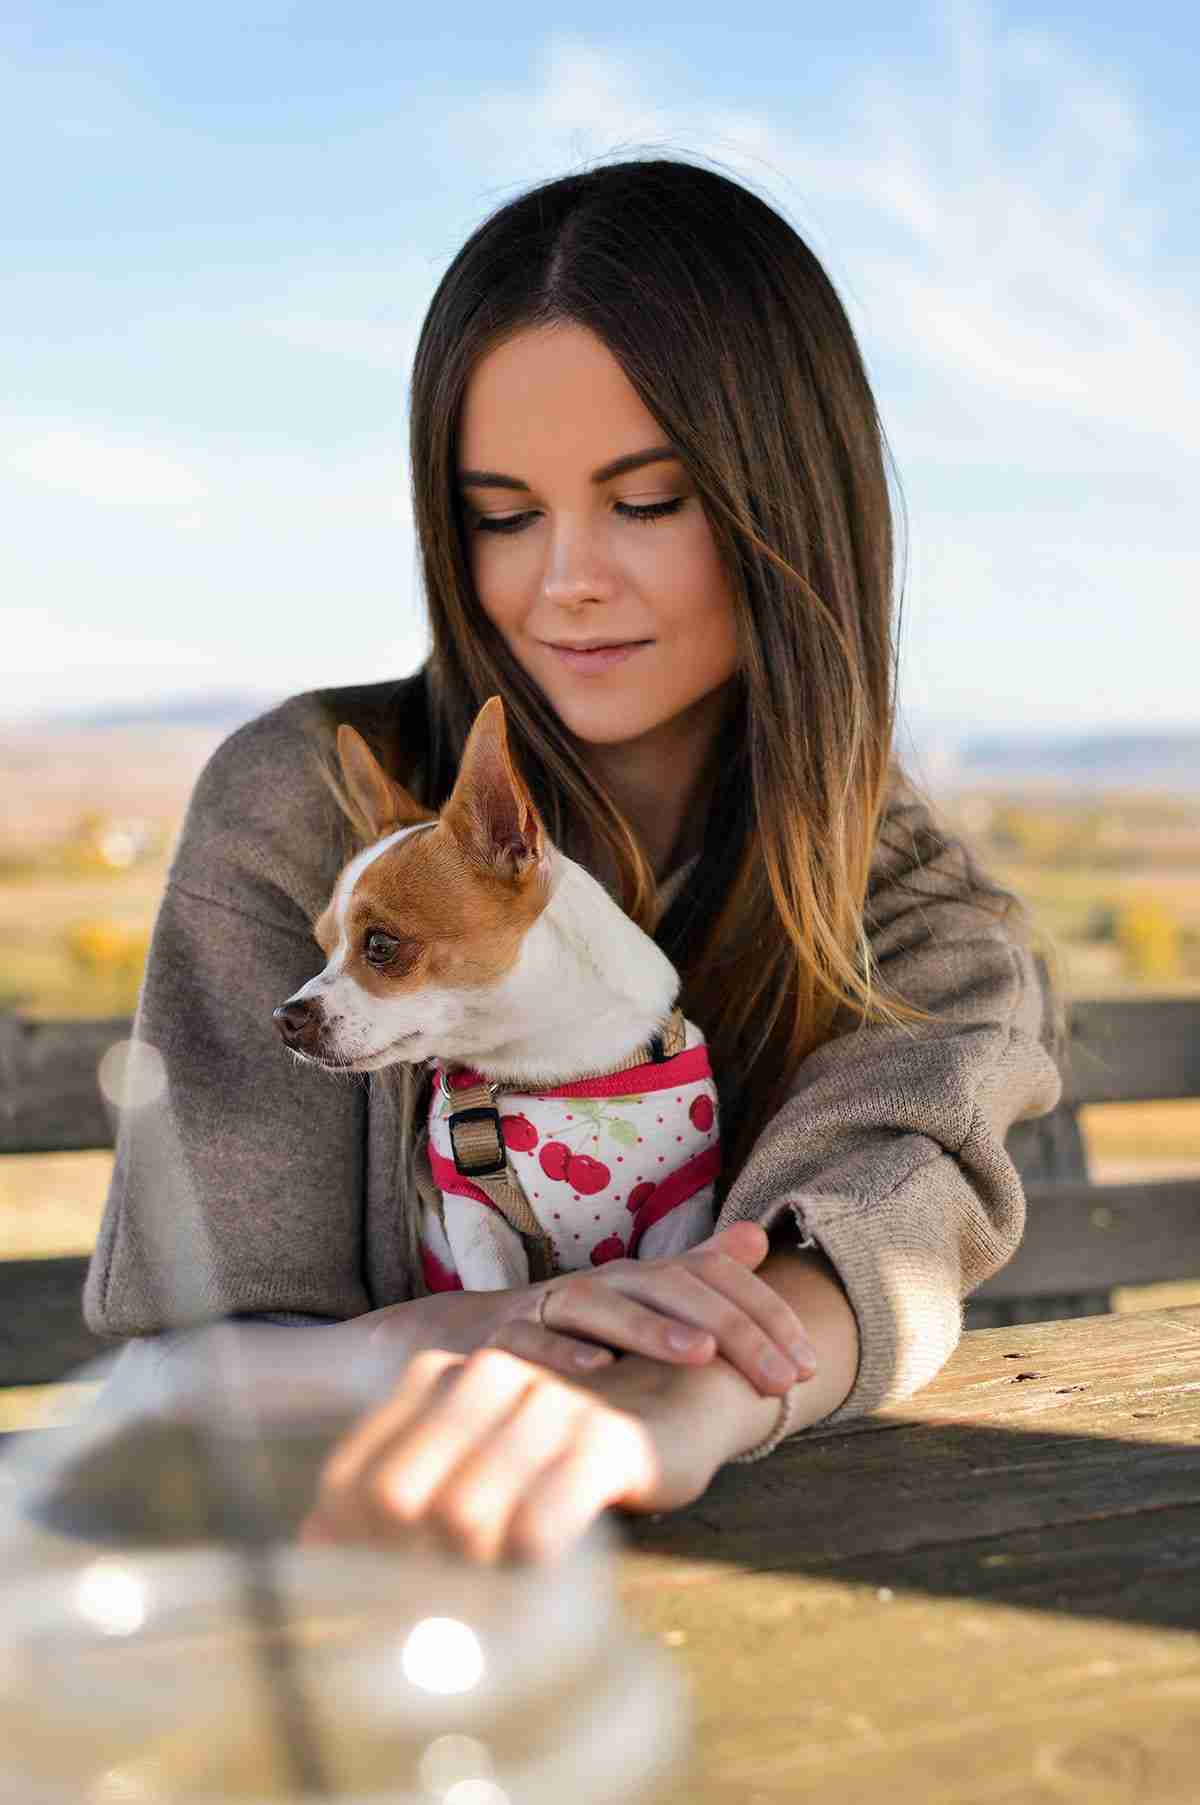 6 good reasons why every woman Should Own A Dog- “Woman’s Best Friend”